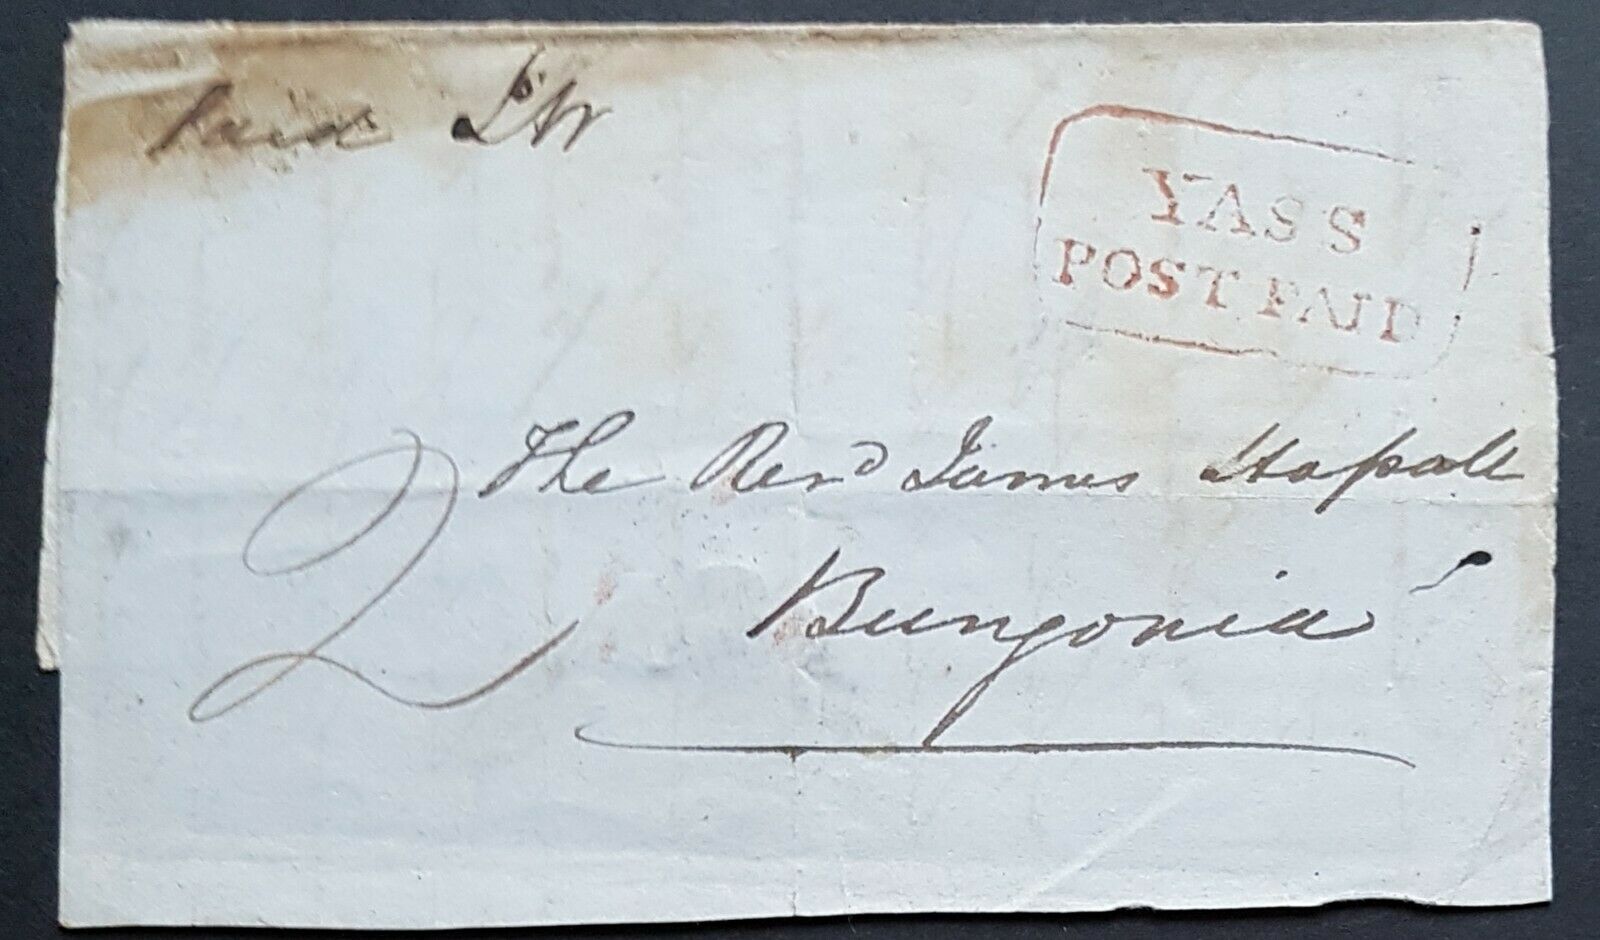 NSW Part entire Post Paid Yass No.7.1850 to Bungonia, backstamped Yass, Goulburn